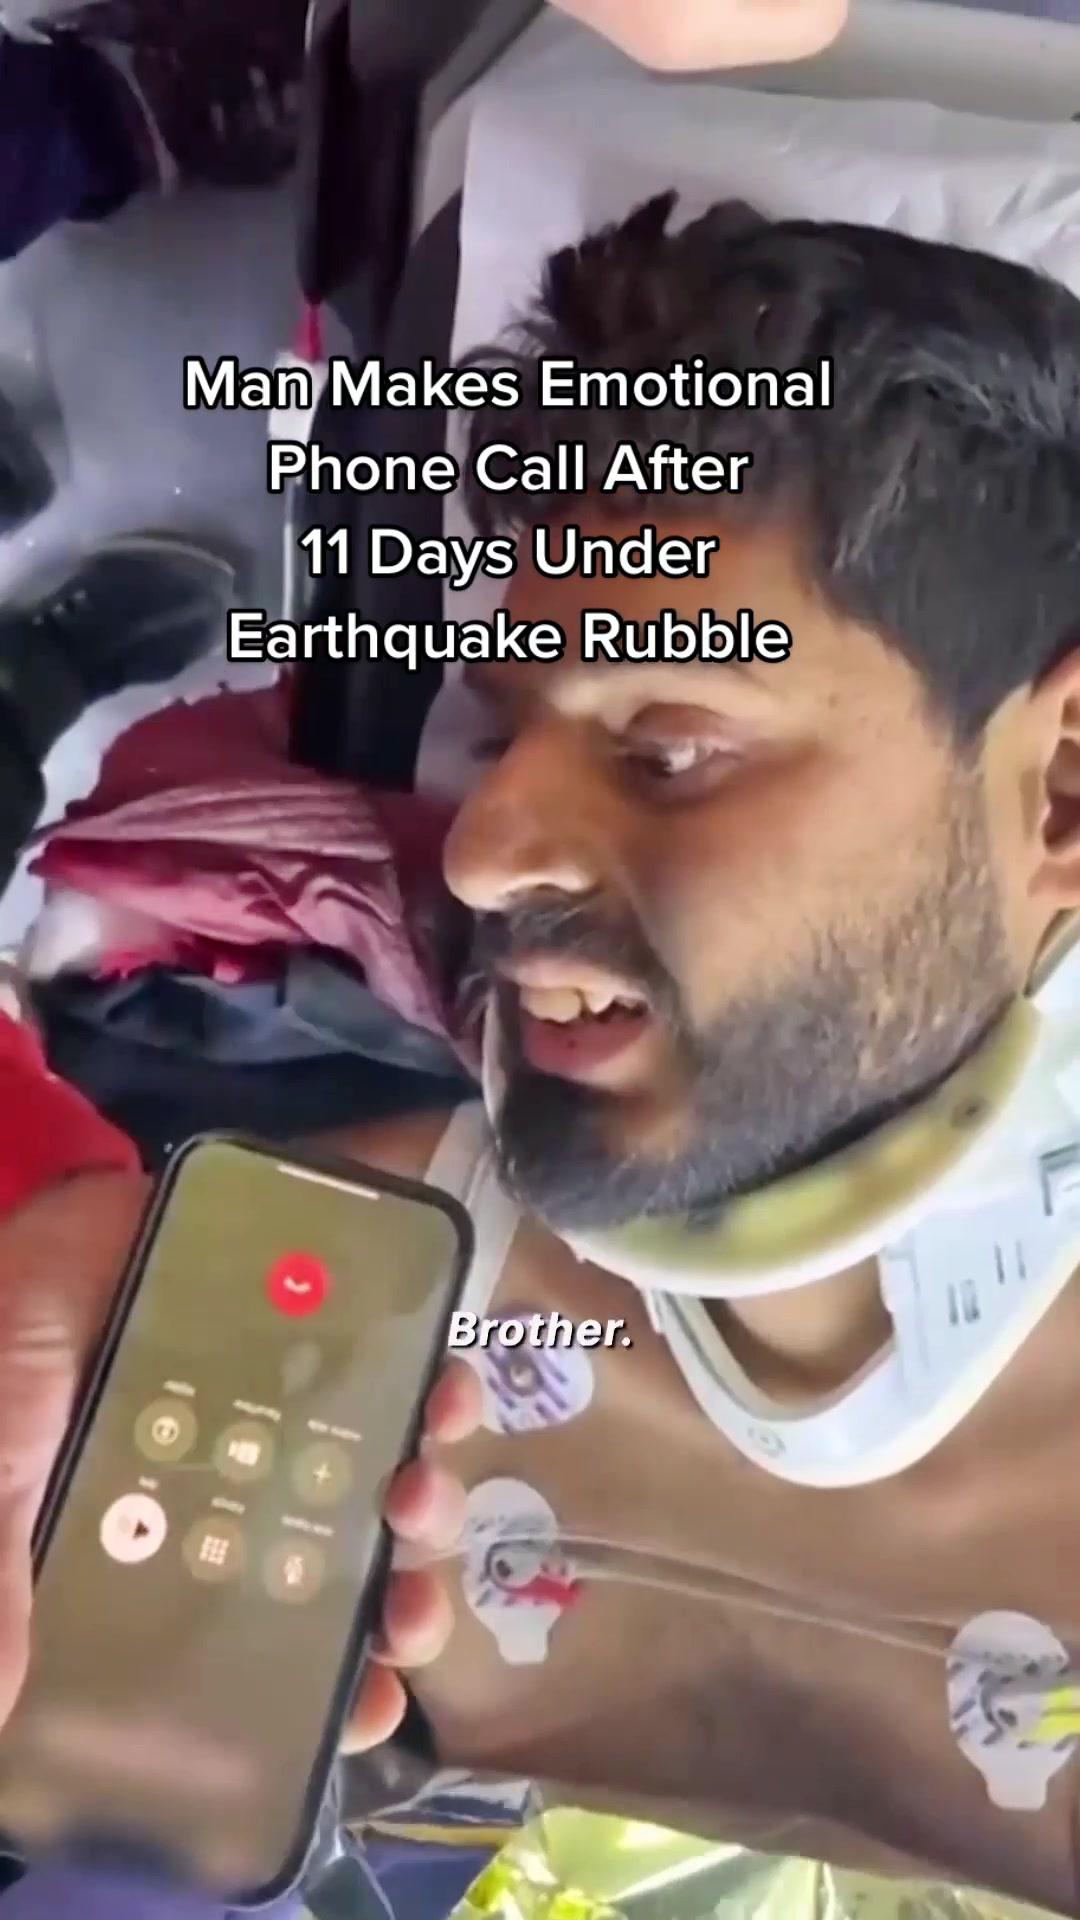 A man discovered his brother was alive 261 hours after the deadly Turkey earthquakes during an emotional phone call. #survivor #earthquake #turkey #syria #rescue #family #rubble #turkeyearthquake2023  | Man Makes Emotional Phone Call After
11 Days Under Earthquake Rubble